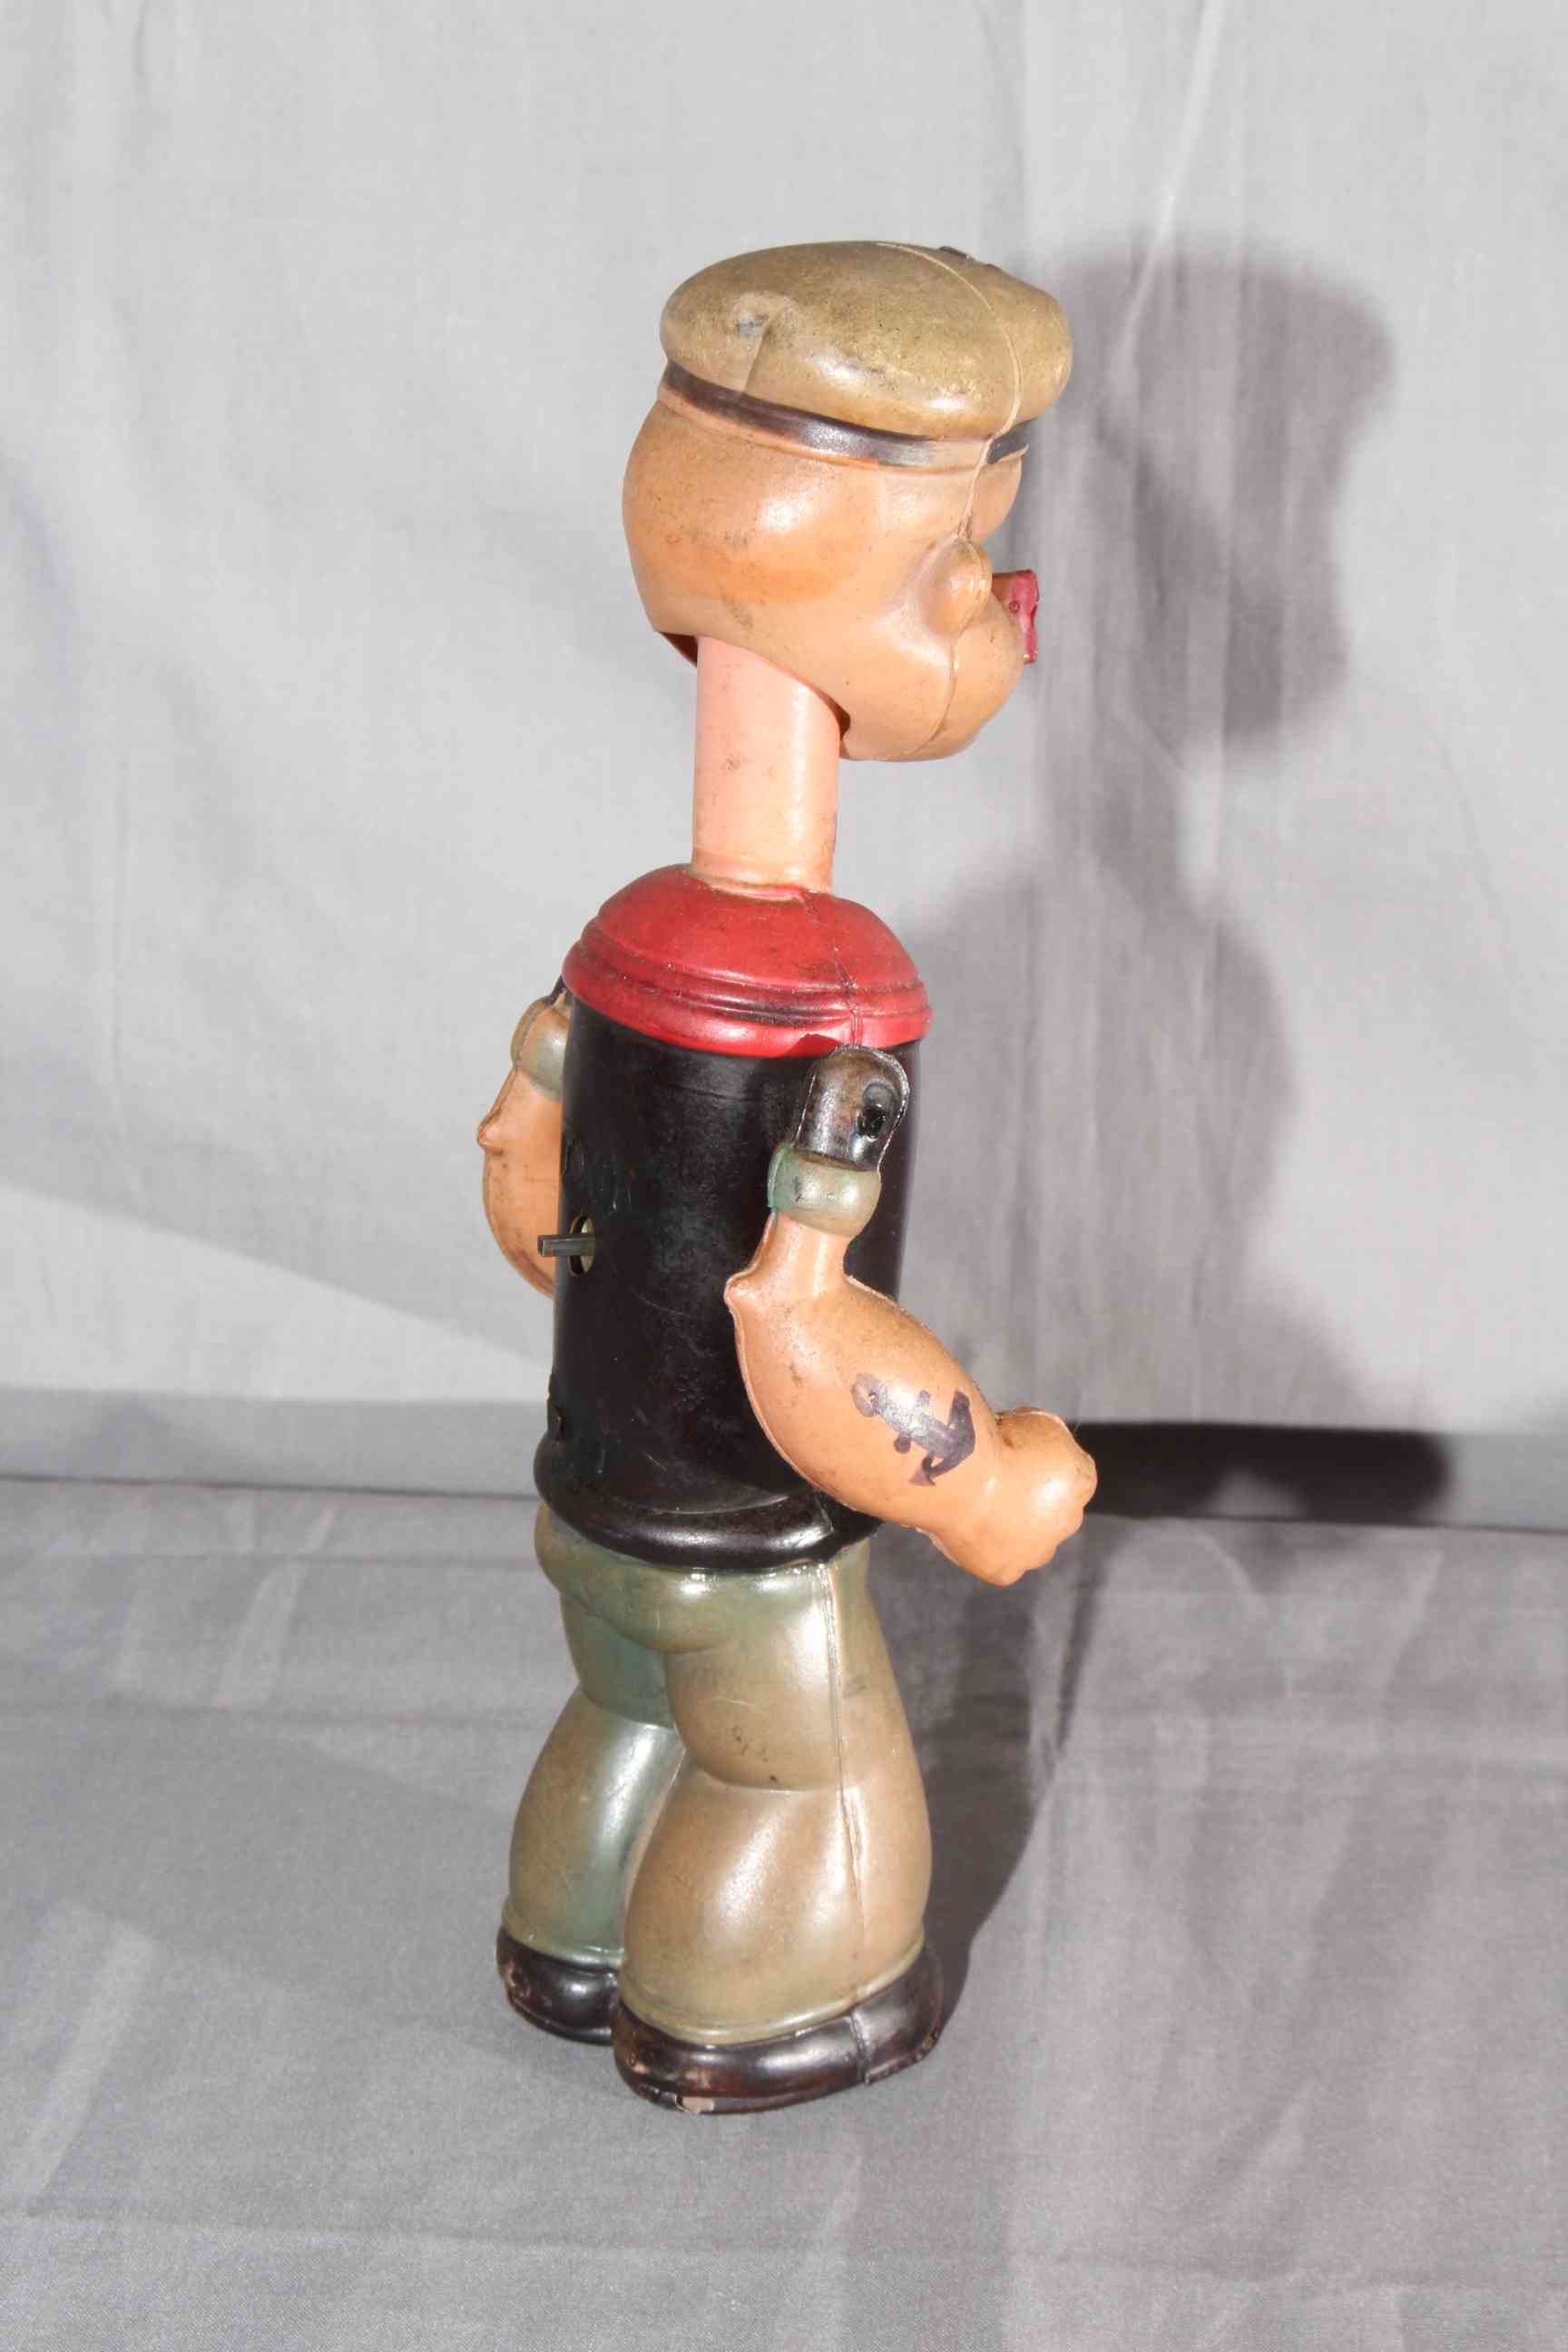 Japanese King Features Syndicates clockwork Celluloid Popeye figure 8” tall. - Image 2 of 2